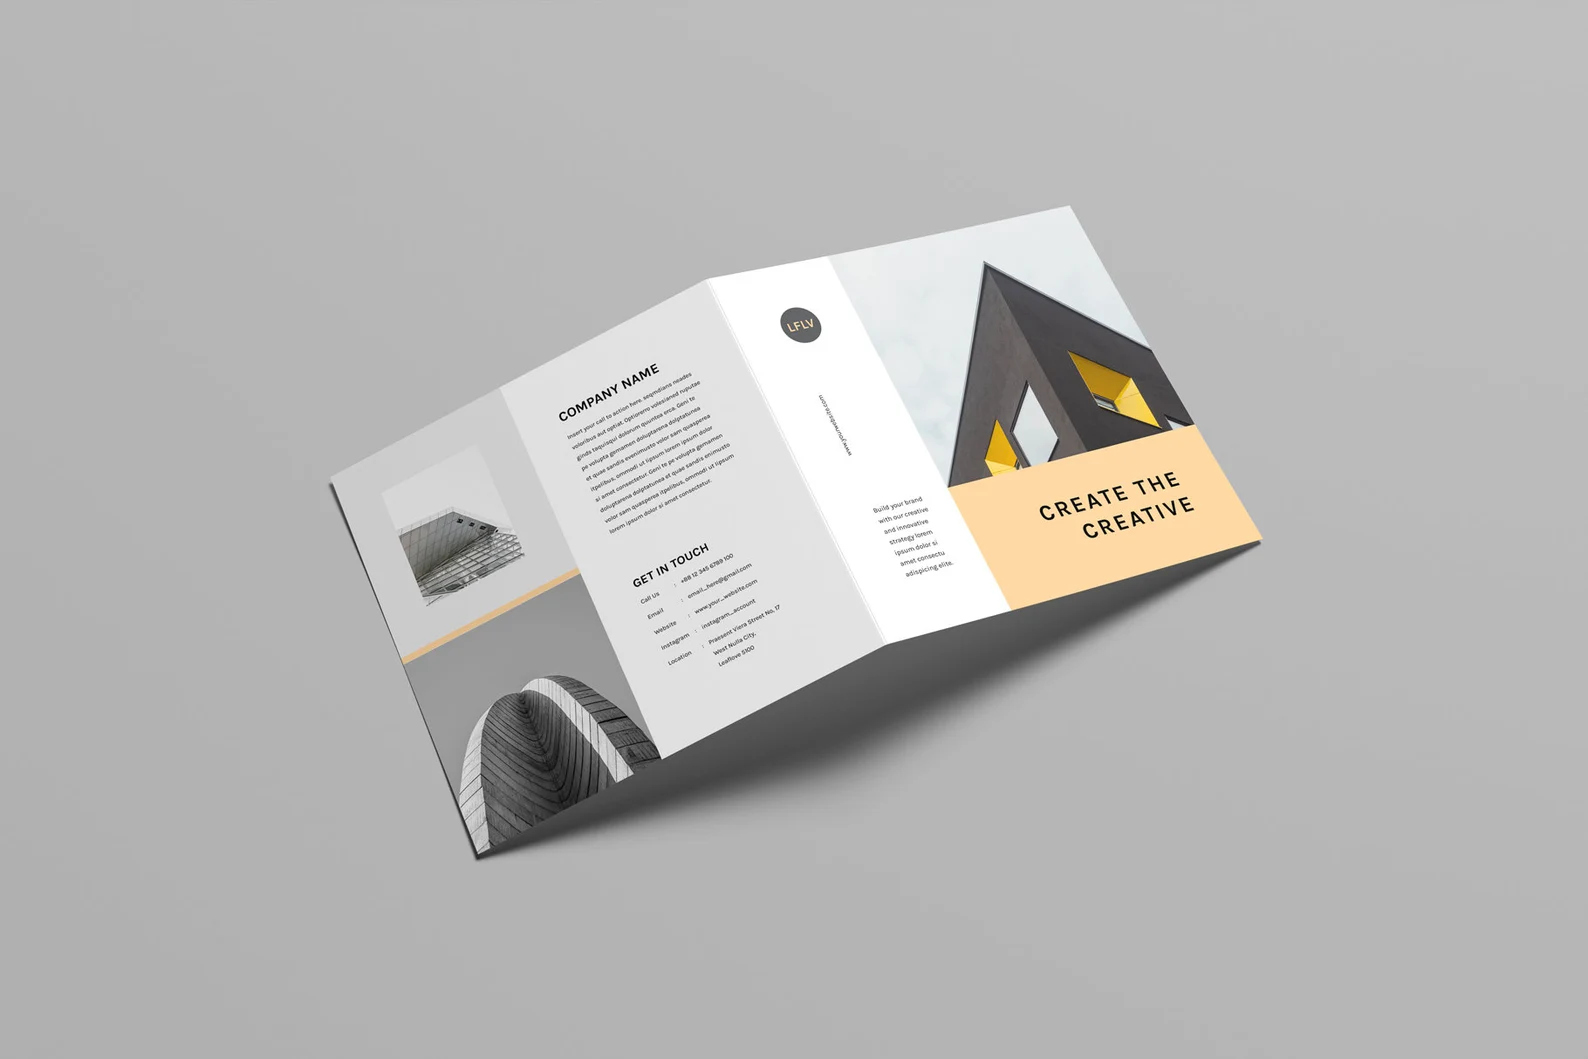 Nice stylish brochure for the modern real estate business.